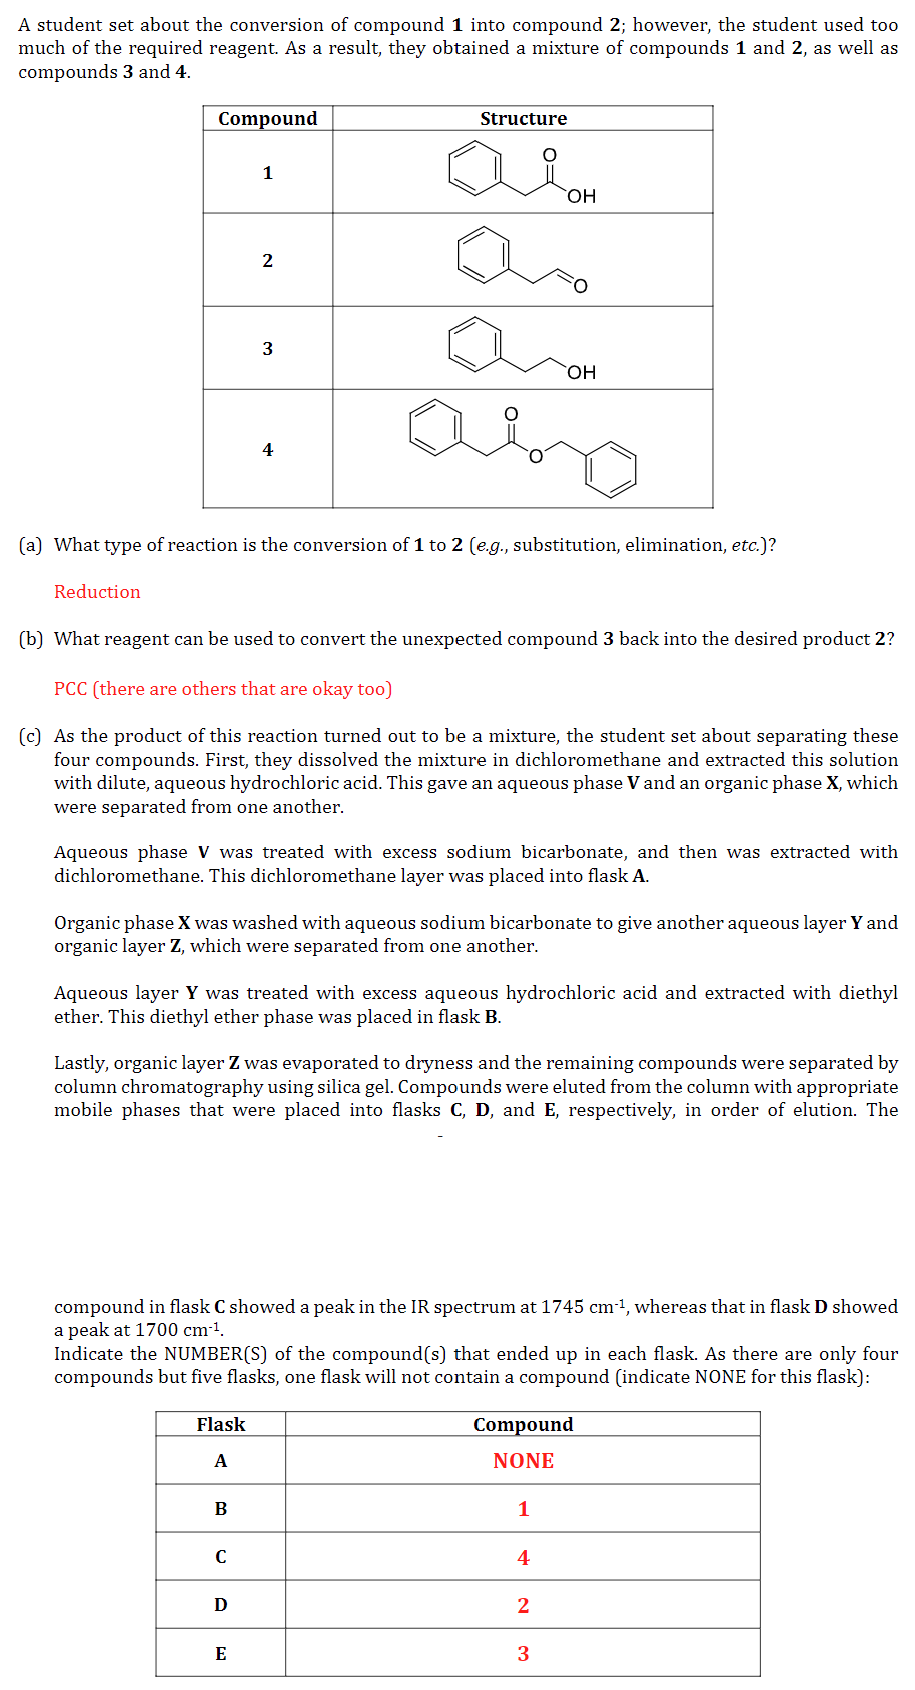 A student set about the conversion of compound 1 into compound 2; however, the student used too
much of the required reagent. As a result, they obtained a mixture of compounds 1 and 2, as well as
compounds 3 and 4.
Compound
Structure
1
2
3
4
ал
OH
an
OH
aso
(a) What type of reaction is the conversion of 1 to 2 (e.g., substitution, elimination, etc.)?
Reduction
(b) What reagent can be used to convert the unexpected compound 3 back into the desired product 2?
PCC (there are others that are okay too)
(c) As the product of this reaction turned out to be a mixture, the student set about separating these
four compounds. First, they dissolved the mixture in dichloromethane and extracted this solution
with dilute, aqueous hydrochloric acid. This gave an aqueous phase V and an organic phase X, which
were separated from one another.
Aqueous phase V was treated with excess sodium bicarbonate, and then was extracted with
dichloromethane. This dichloromethane layer was placed into flask A.
Organic phase X was washed with aqueous sodium bicarbonate to give another aqueous layer Y and
organic layer Z, which were separated from one another.
Aqueous layer Y was treated with excess aqueous hydrochloric acid and extracted with diethyl
ether. This diethyl ether phase was placed in flask B.
Lastly, organic layer Z was evaporated to dryness and the remaining compounds were separated by
column chromatography using silica gel. Compounds were eluted from the column with appropriate
mobile phases that were placed into flasks C, D, and E, respectively, in order of elution. The
compound in flask C showed a peak in the IR spectrum at 1745 cm-1, whereas that in flask D showed
a peak at 1700 cm-¹.
Indicate the NUMBER(S) of the compound(s) that ended up in each flask. As there are only four
compounds but five flasks, one flask will not contain a compound (indicate NONE for this flask):
Flask
A
Compound
NONE
B
1
с
4
D
2
E
3